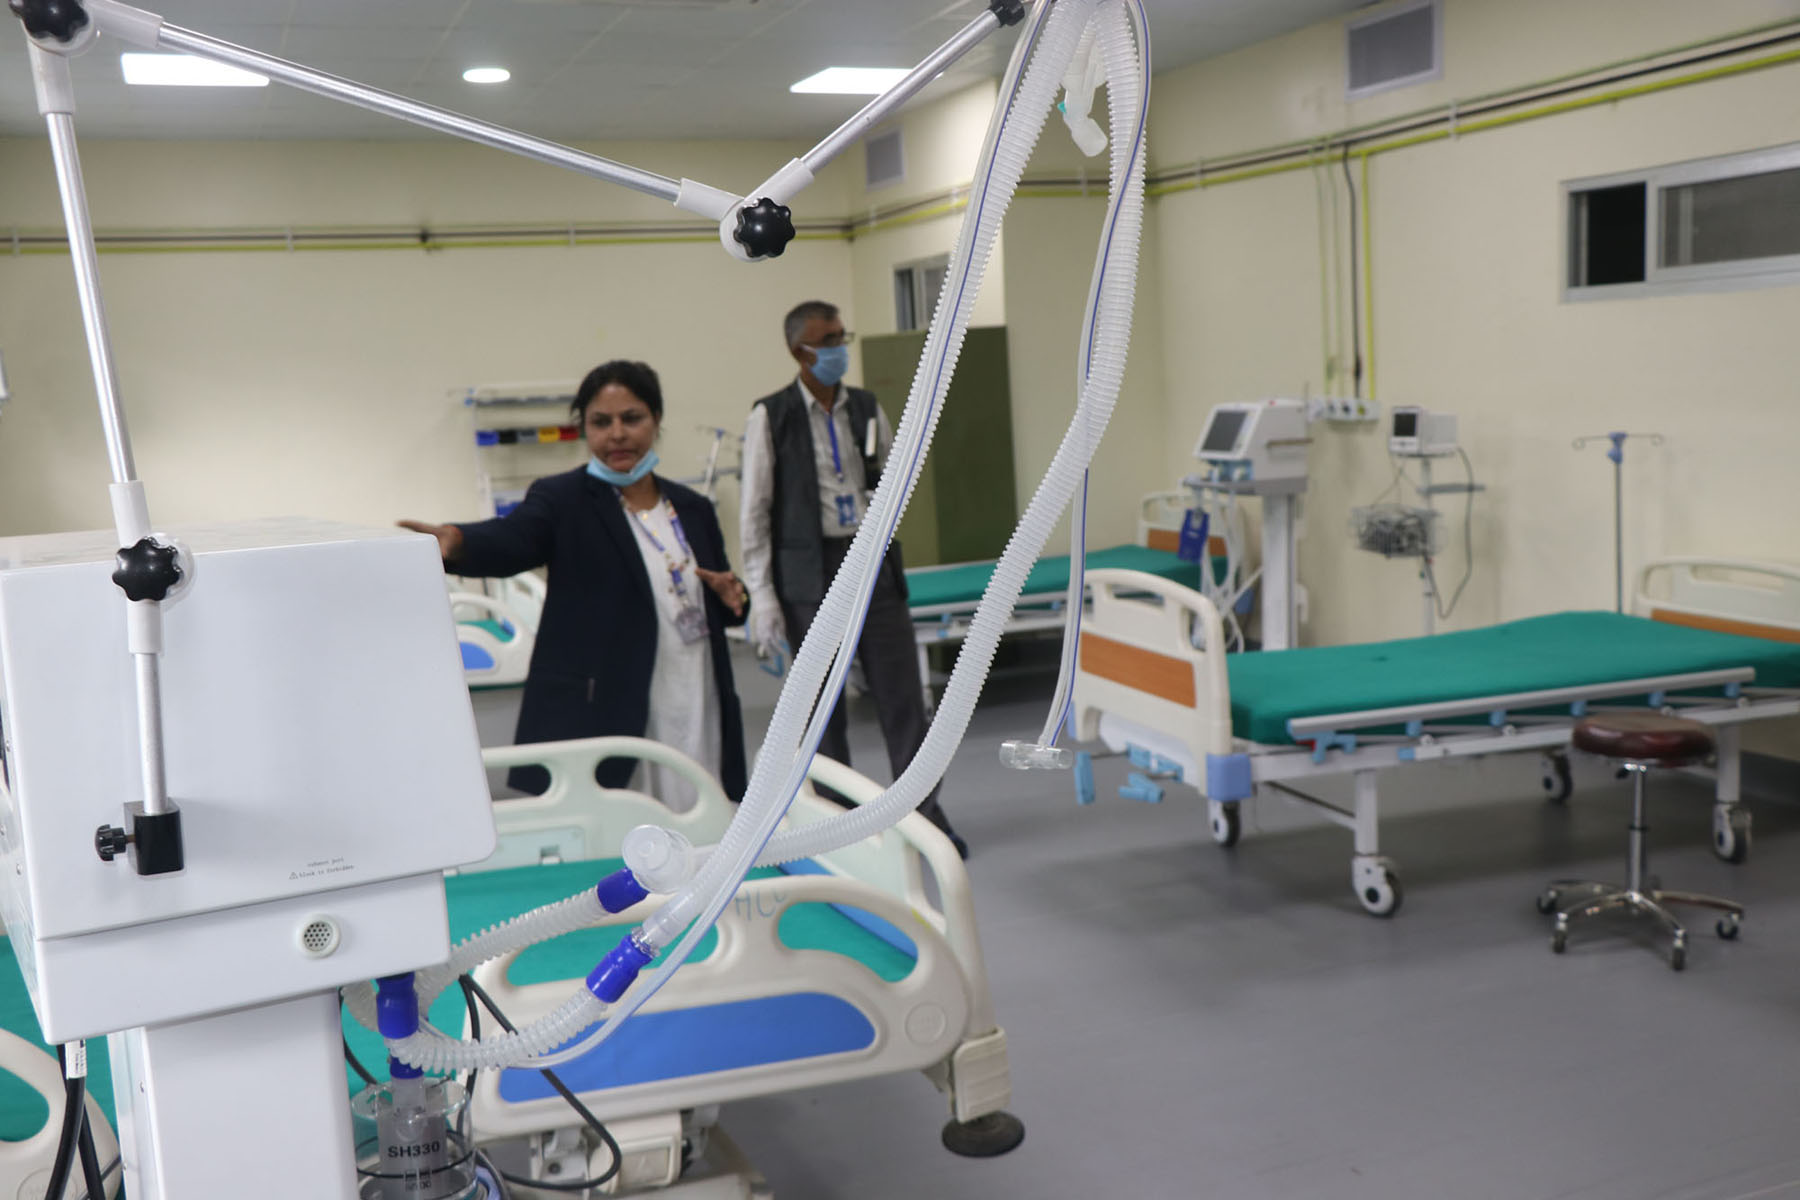 396 local units to have 15-bed hospitals